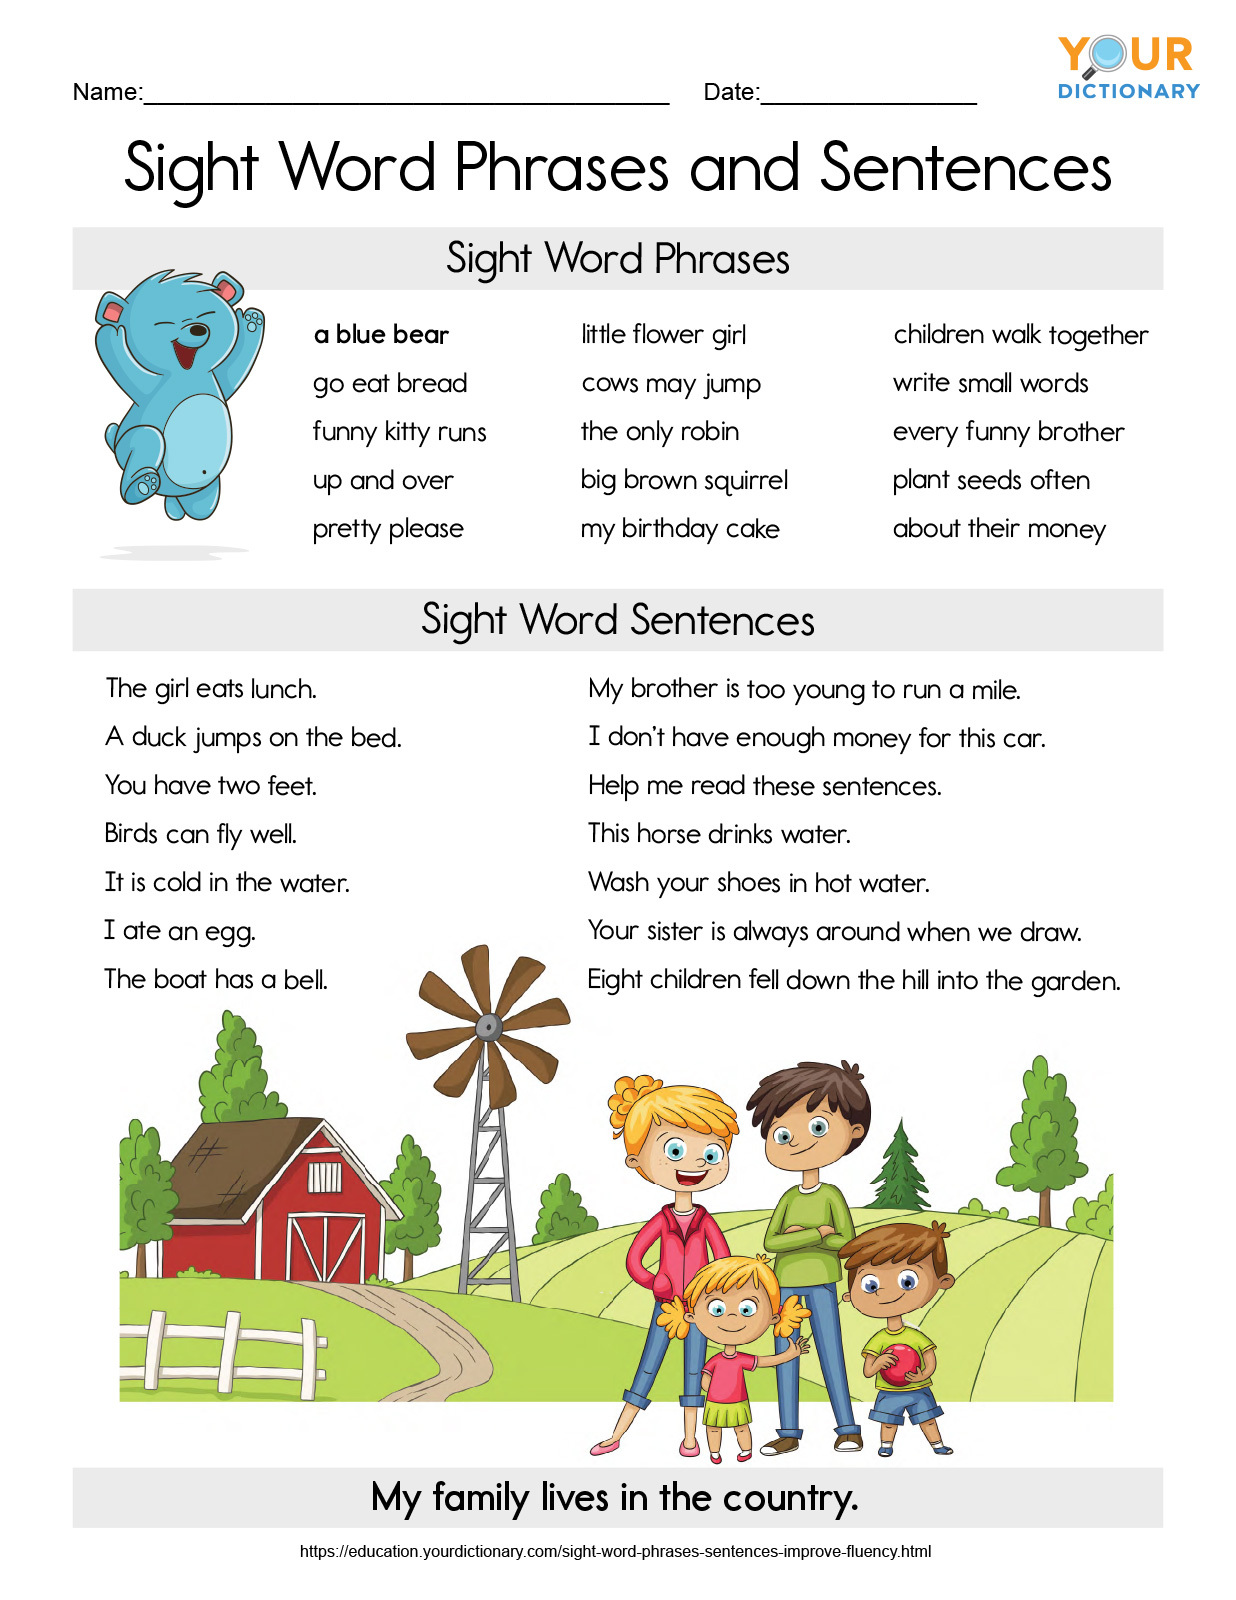 sight word phrases and sentences